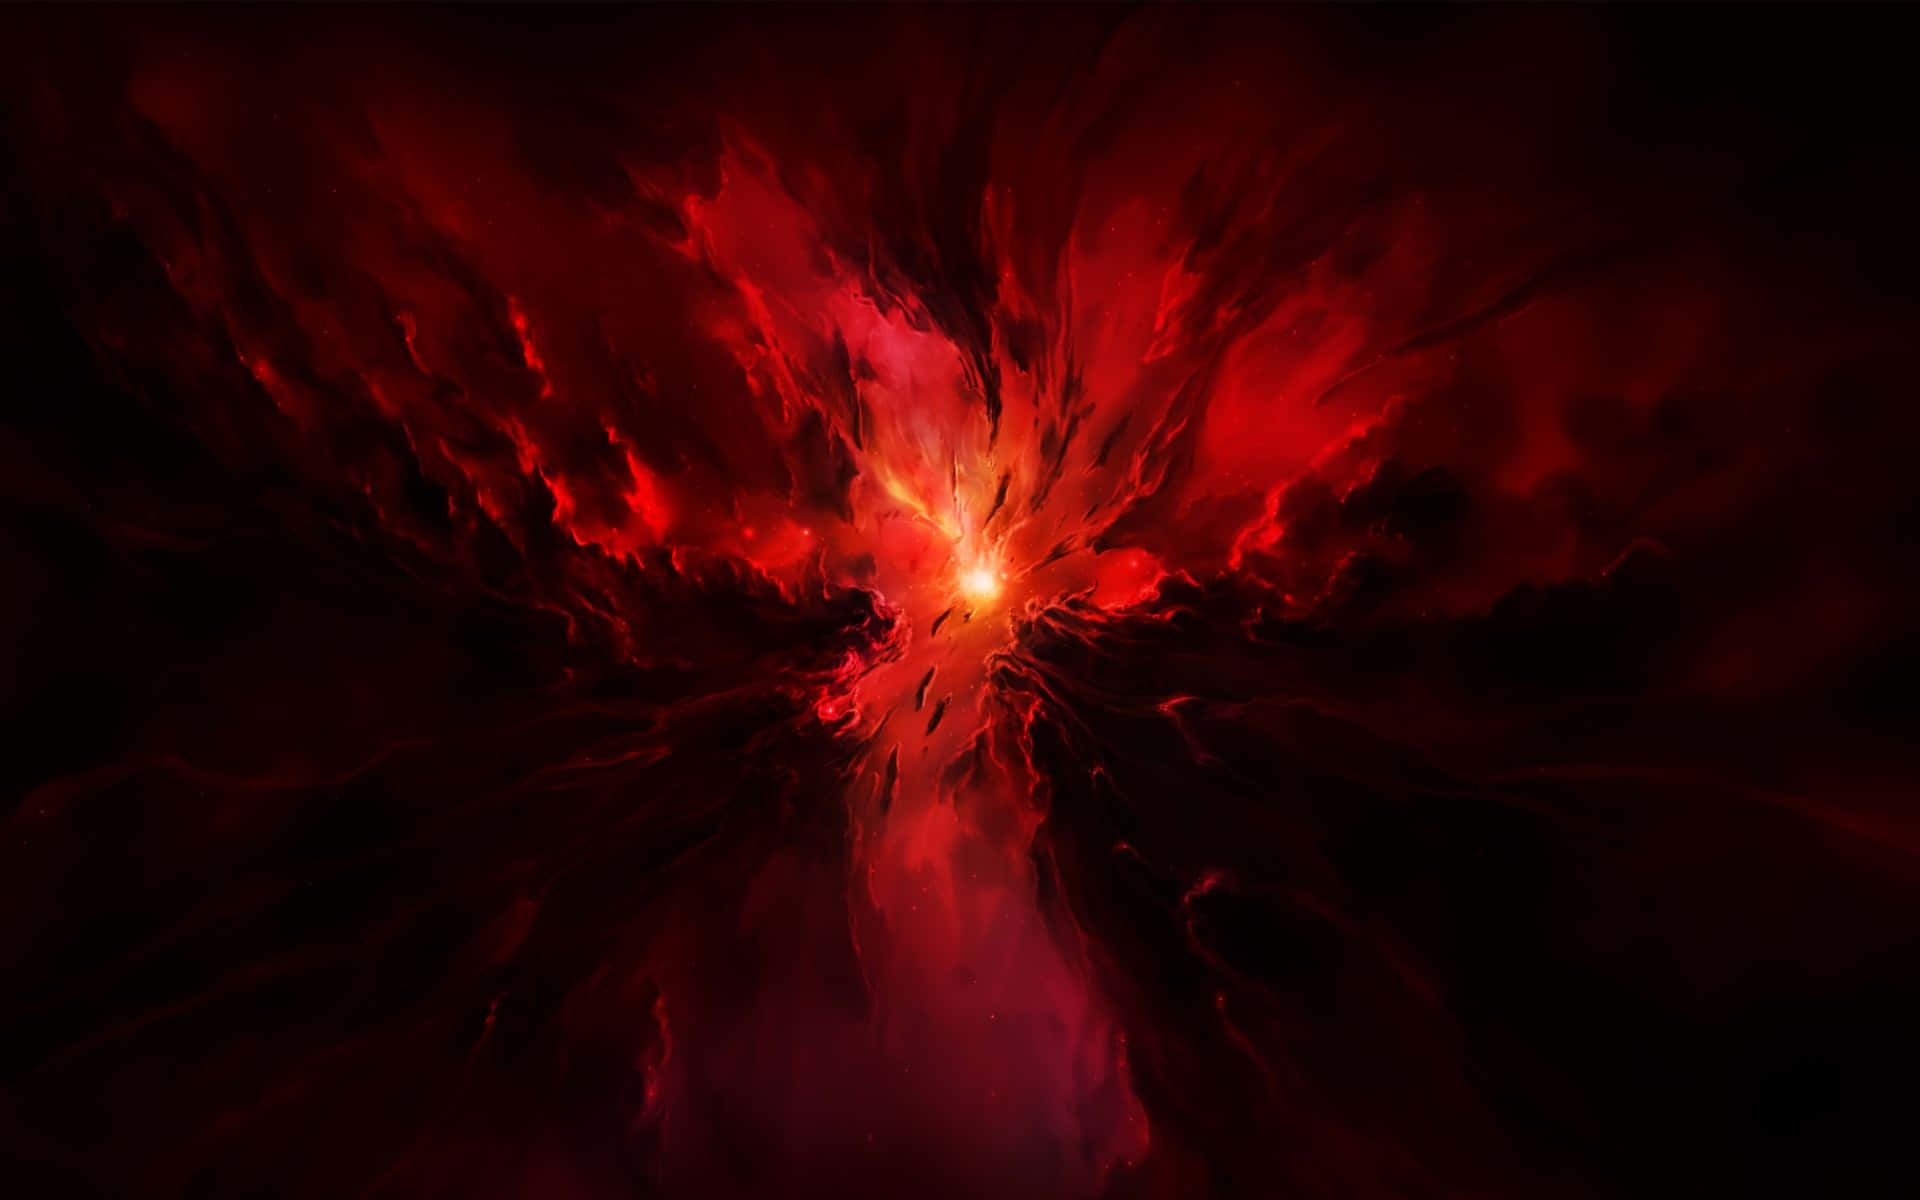 A Swirling Red Nebula in Space Wallpaper